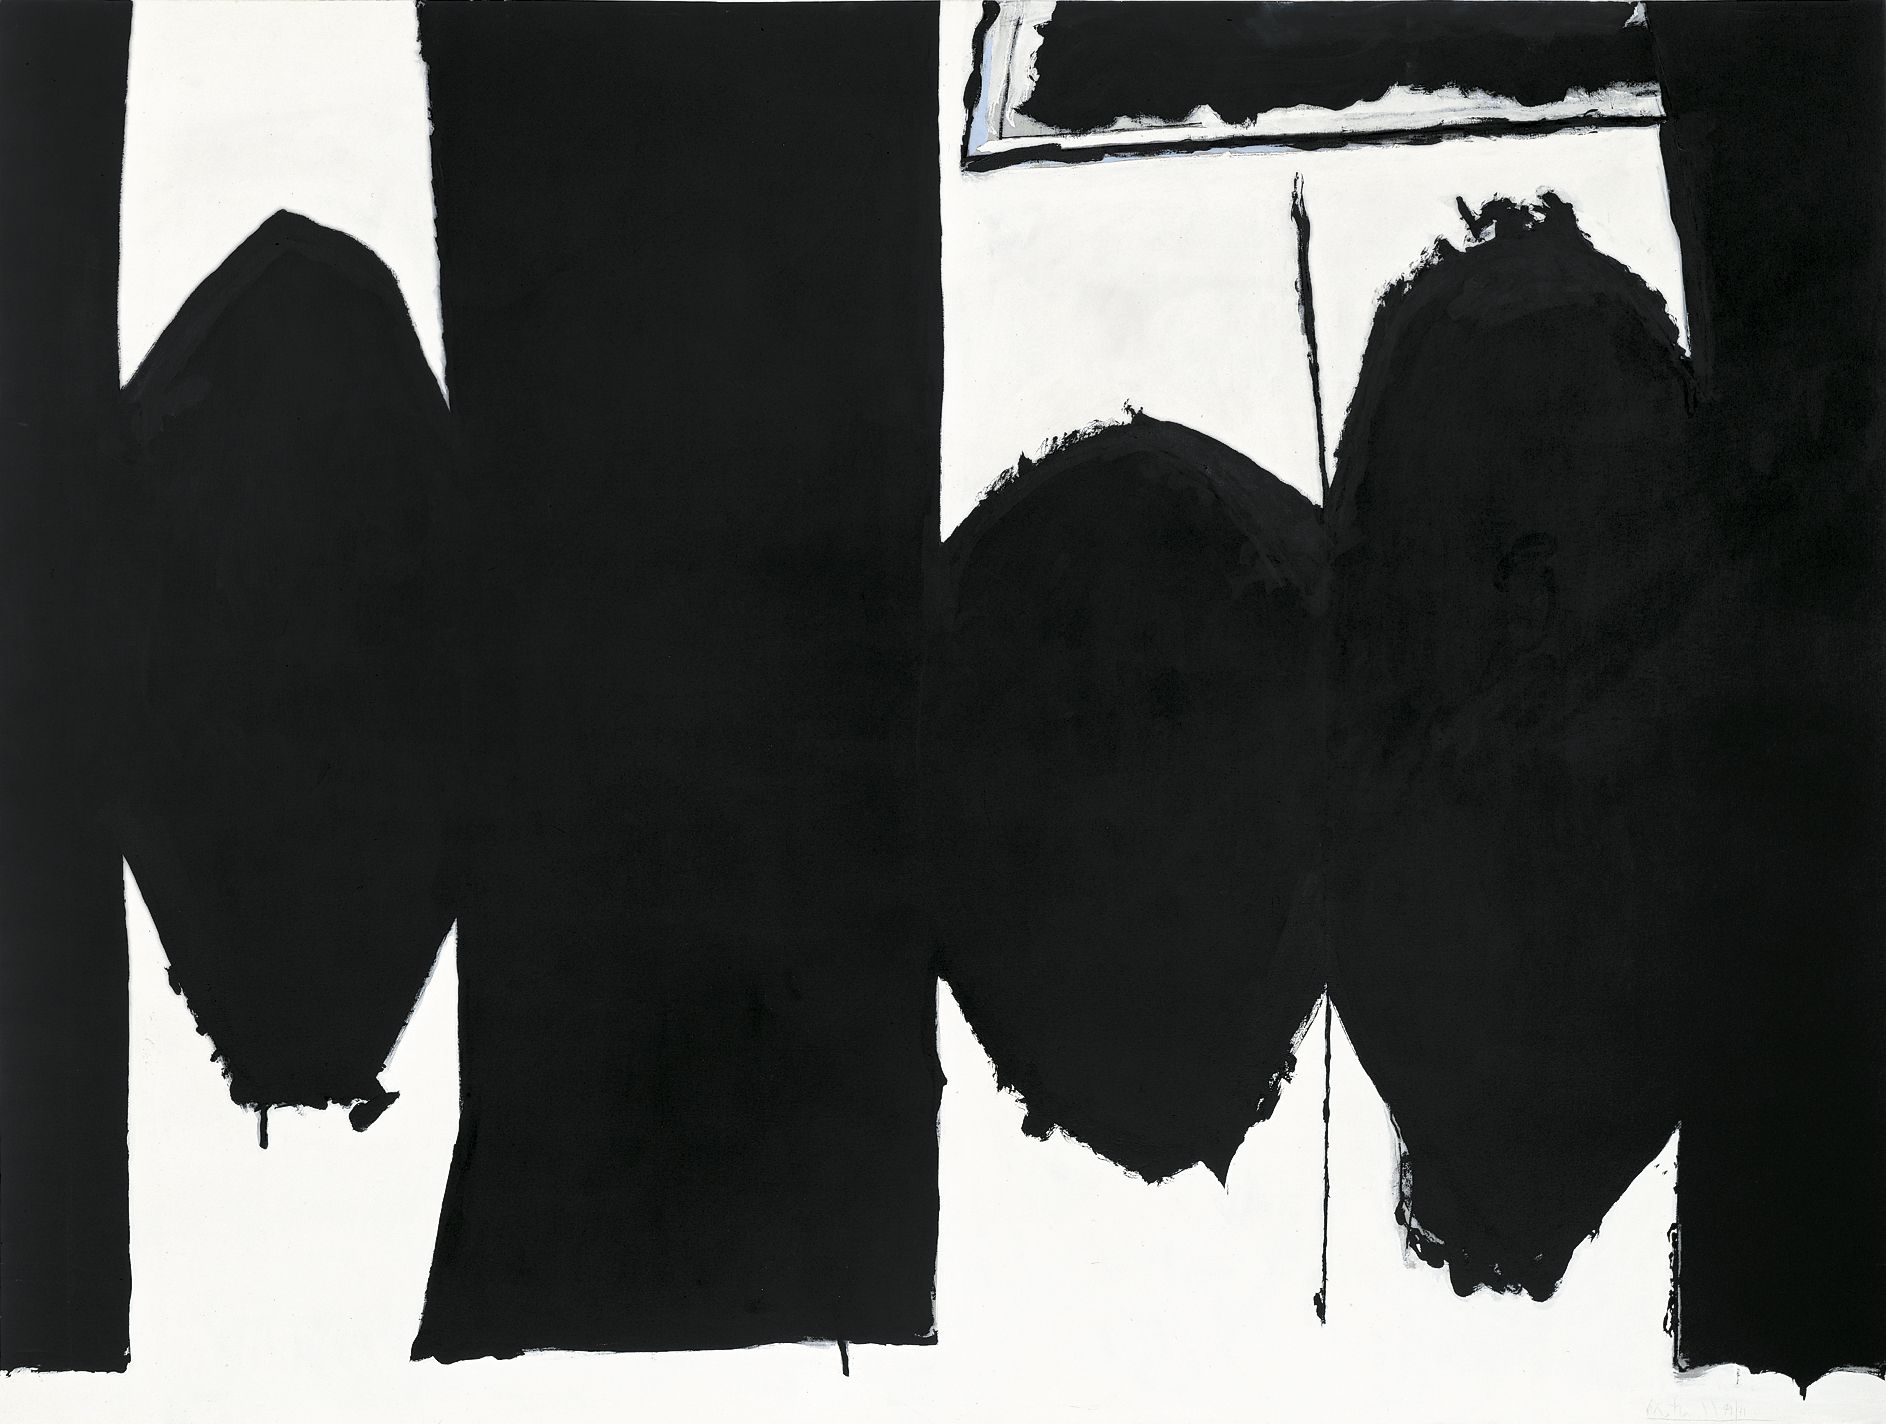 At Five in the Afternoon, 1971. Acrylic on canvas, 90 x 120 inches (228.6 x 304.8 cm)